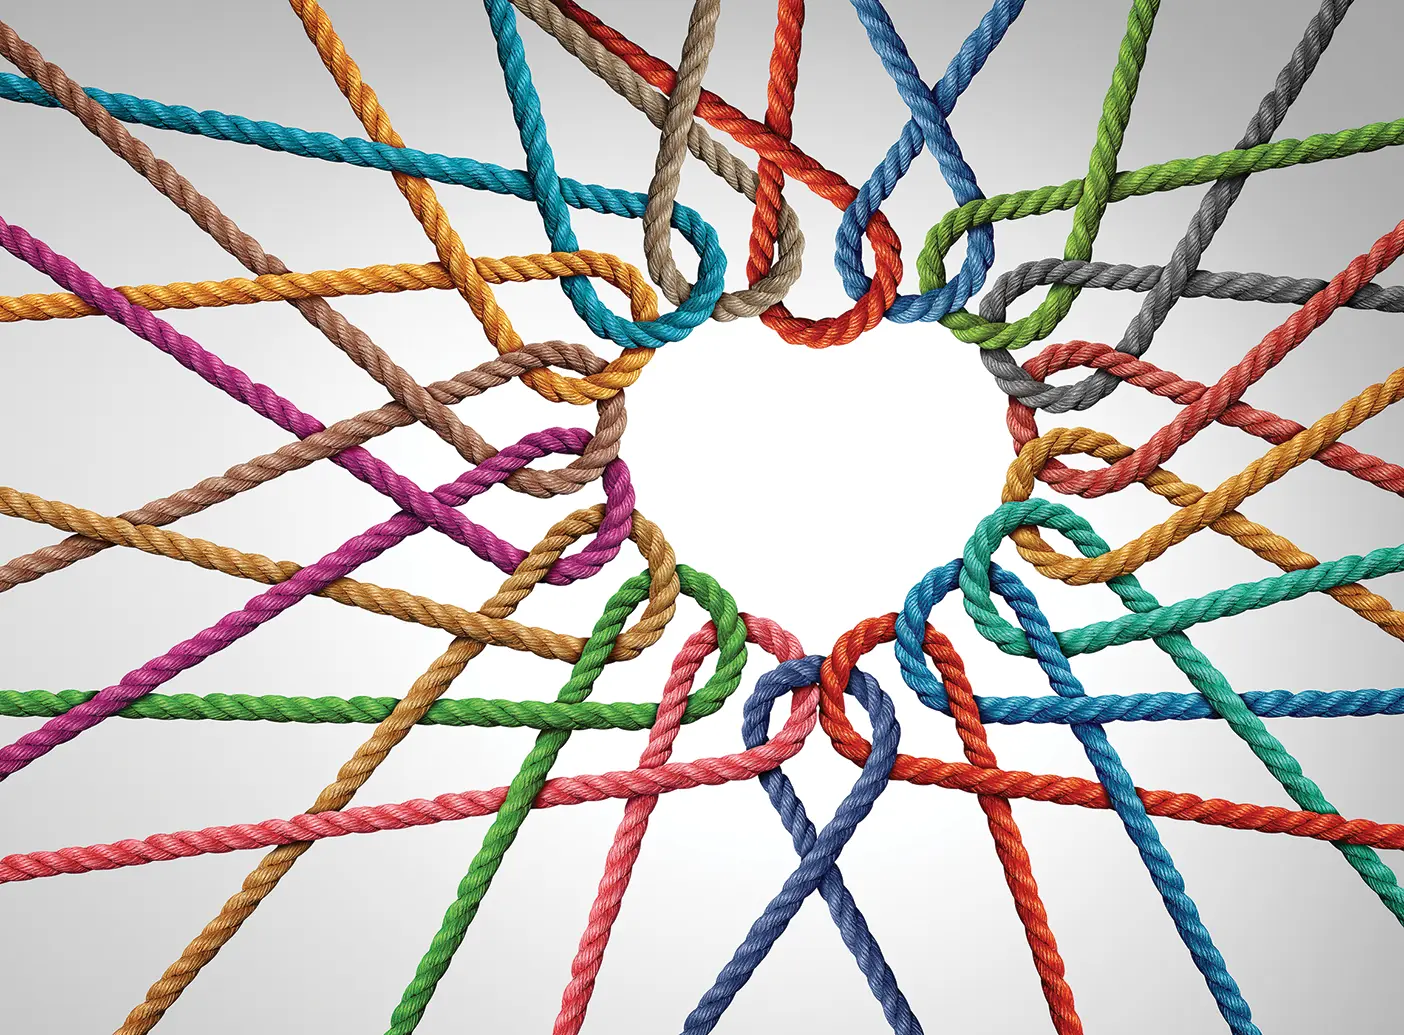 Colorful strings woven together to form a heart shape.